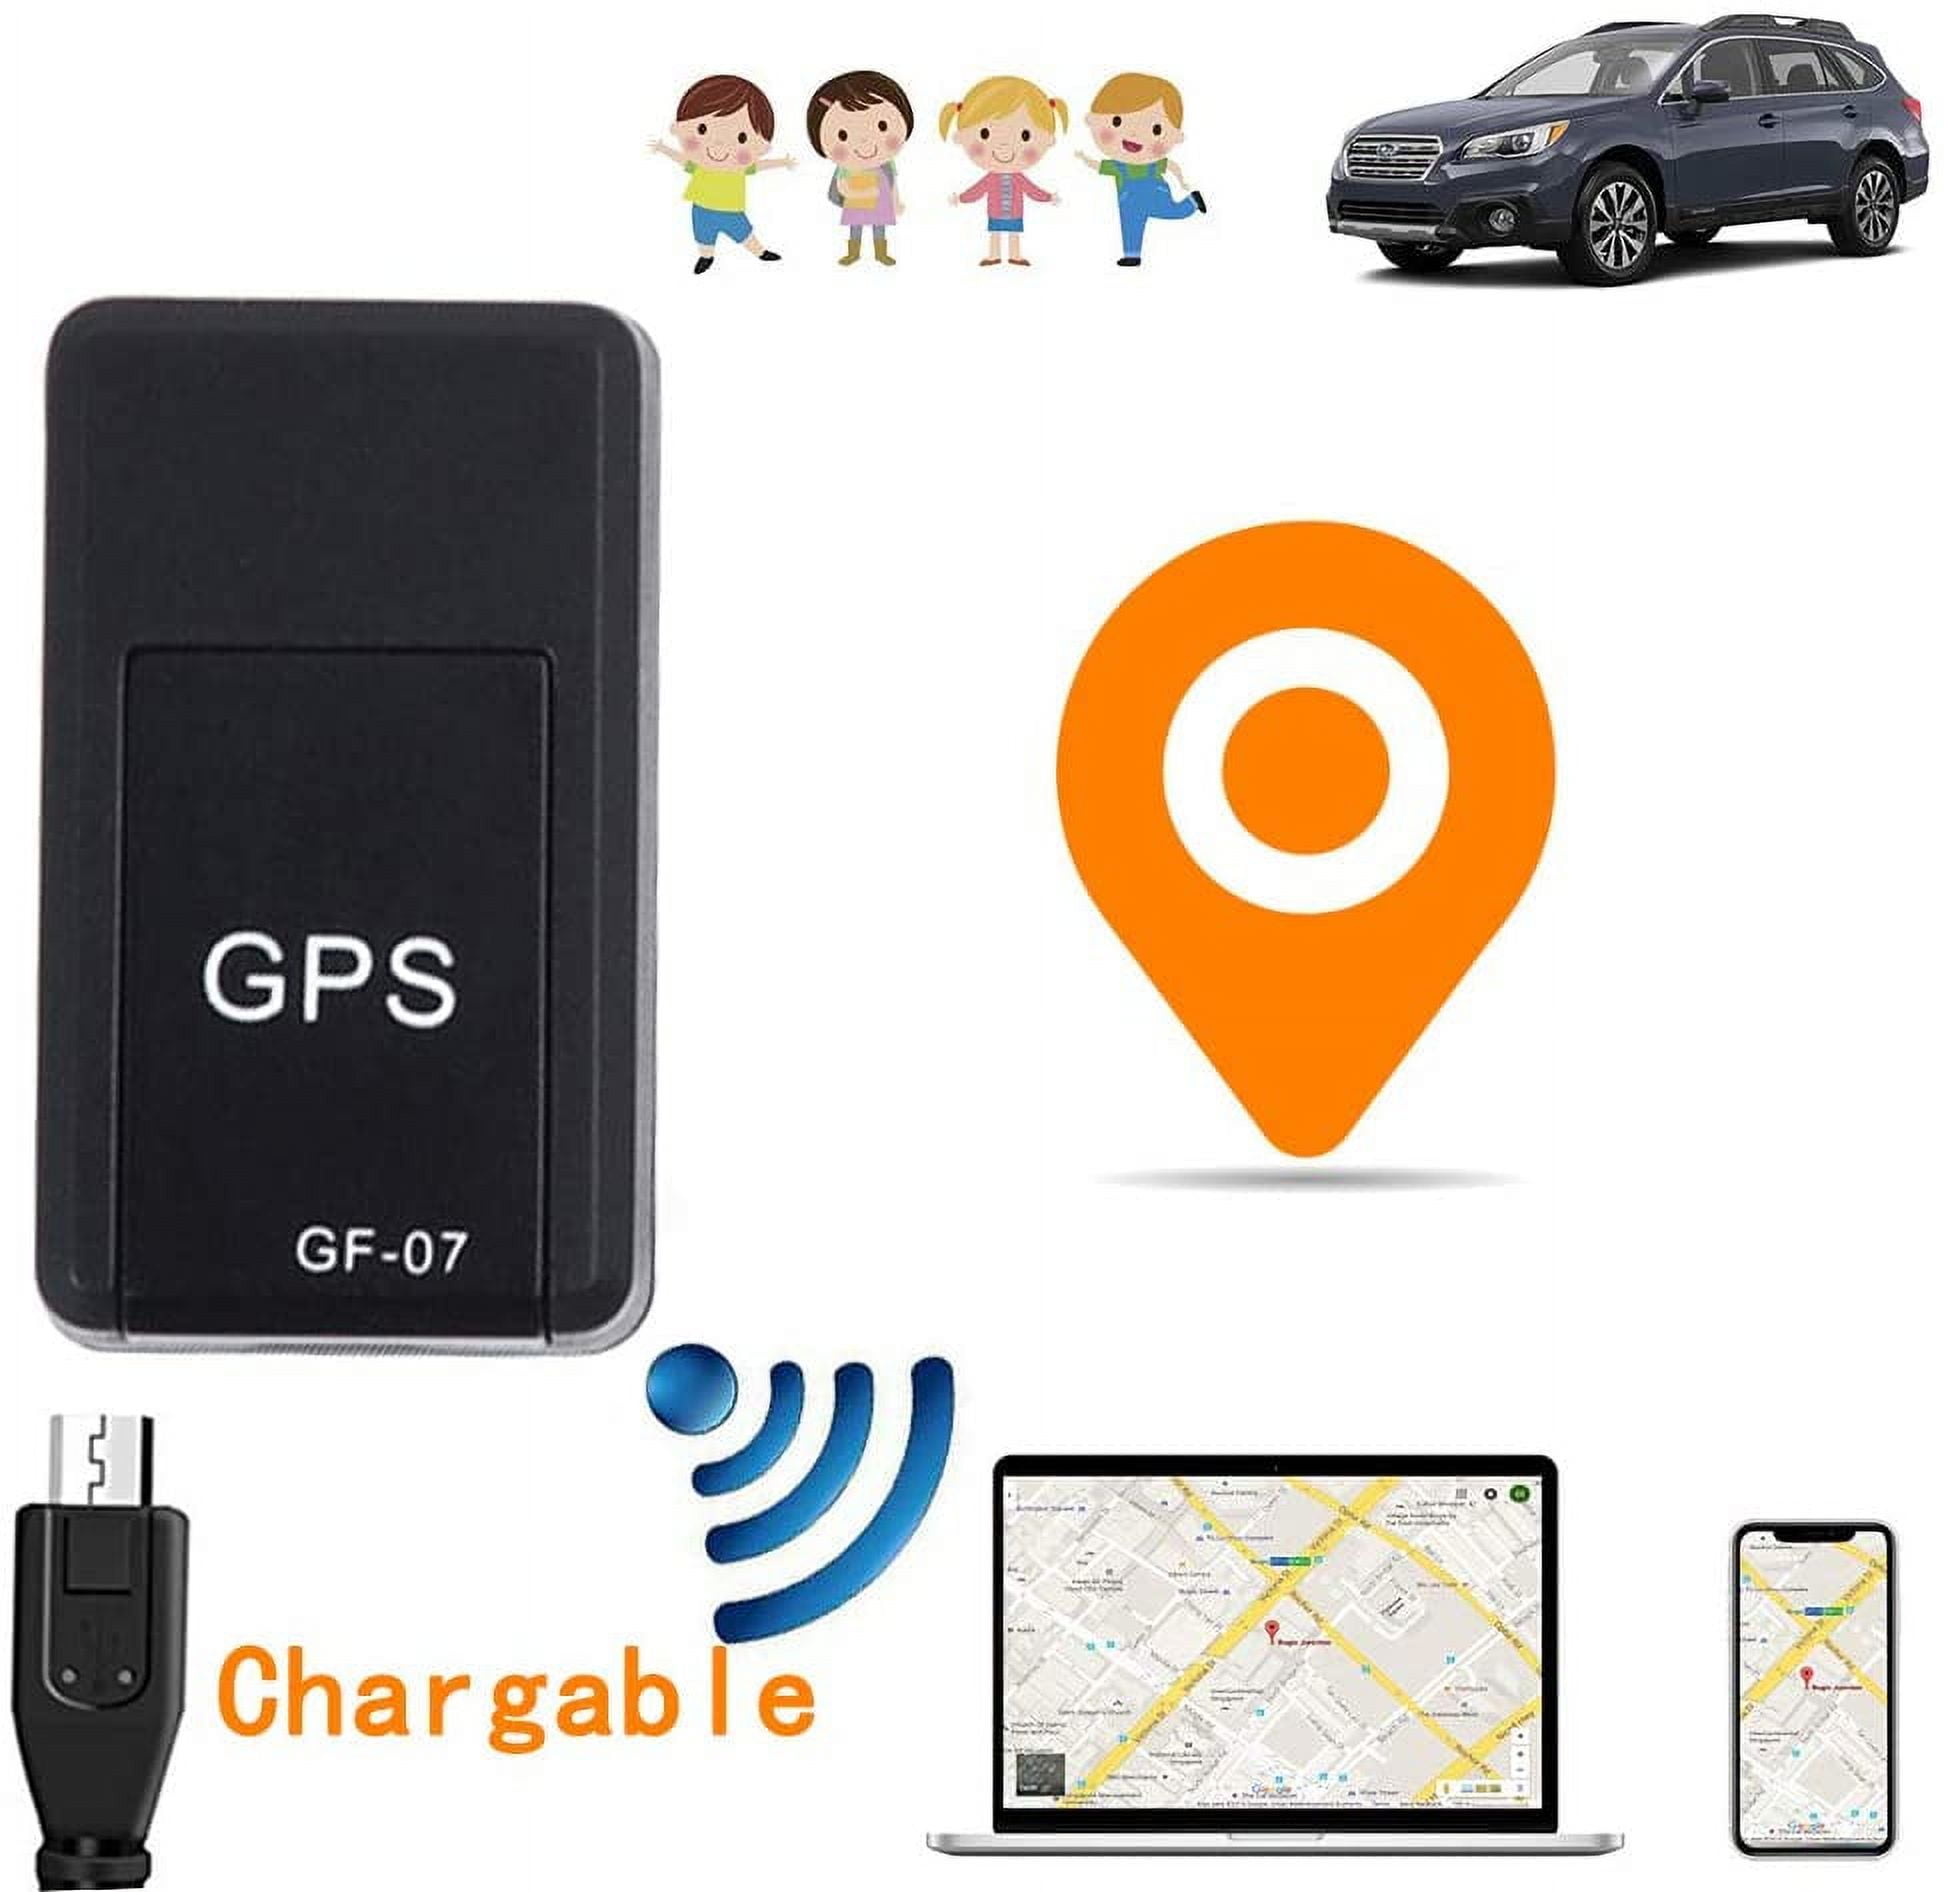 Mini Gps Tracker Device, Anti-Thief Portable Real Time Personal And Vehicle  Long Standby Gps Tracker For